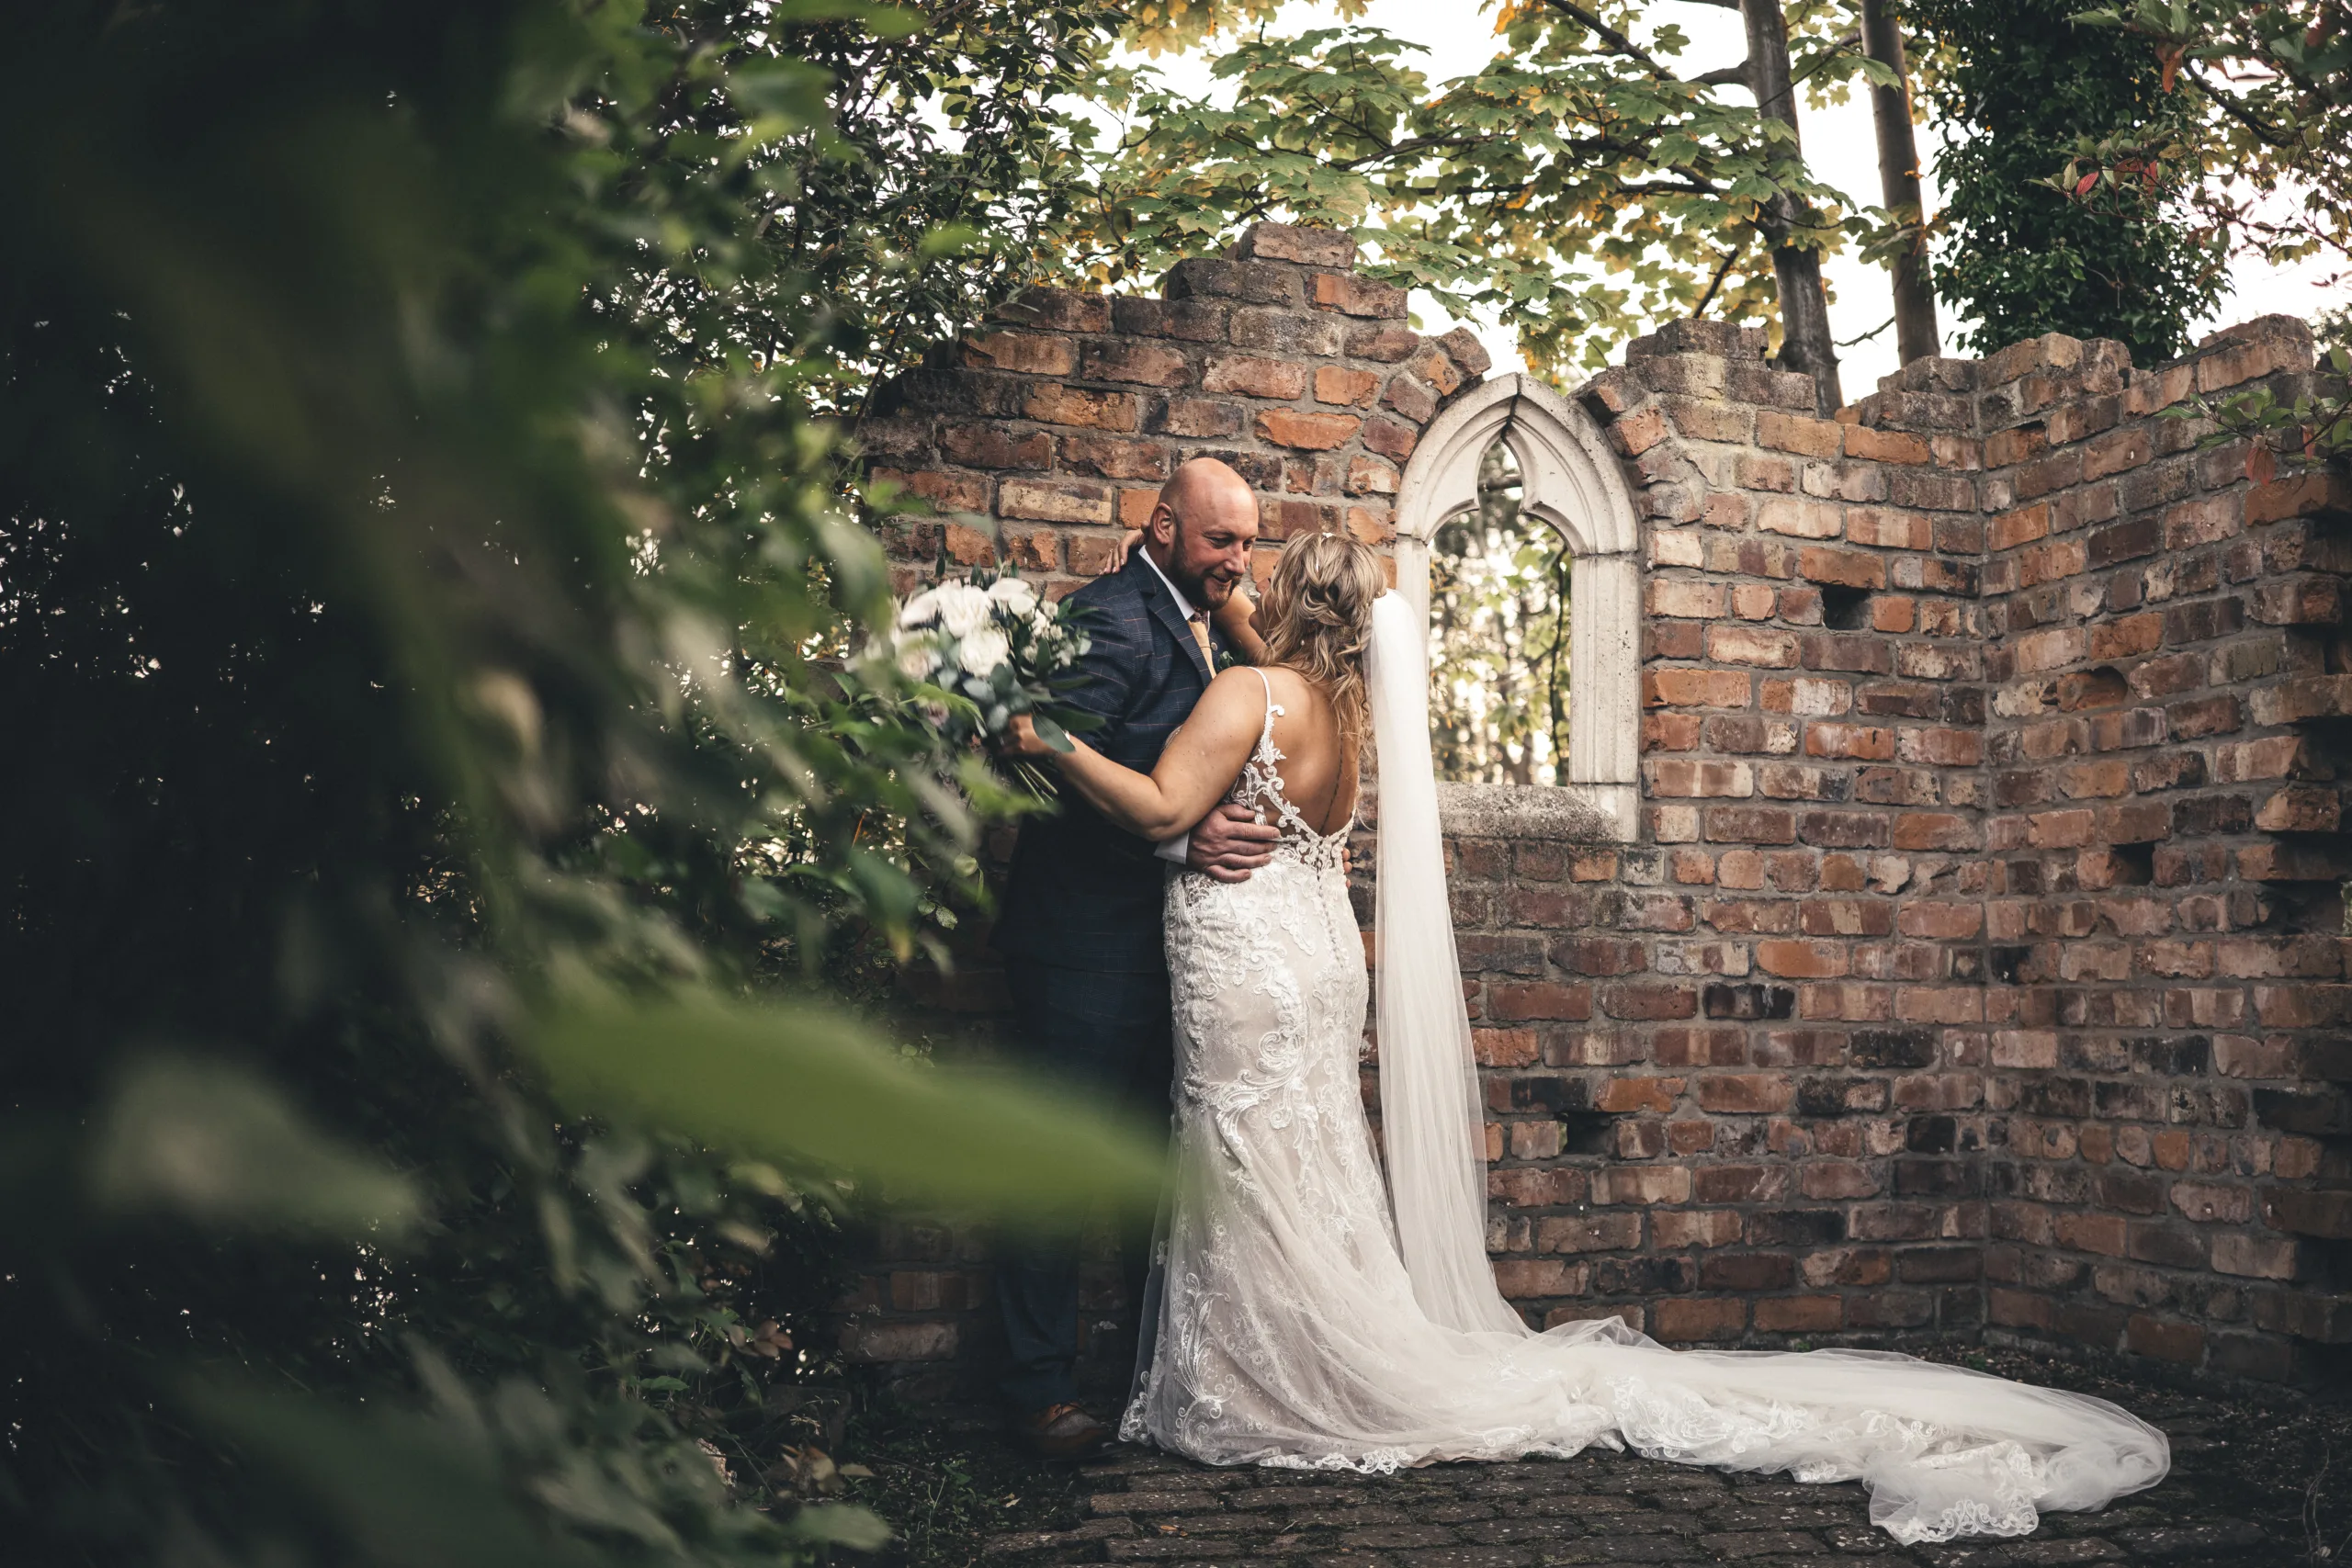 A bride and groom kissing in front of a Yorkshire brick wall.